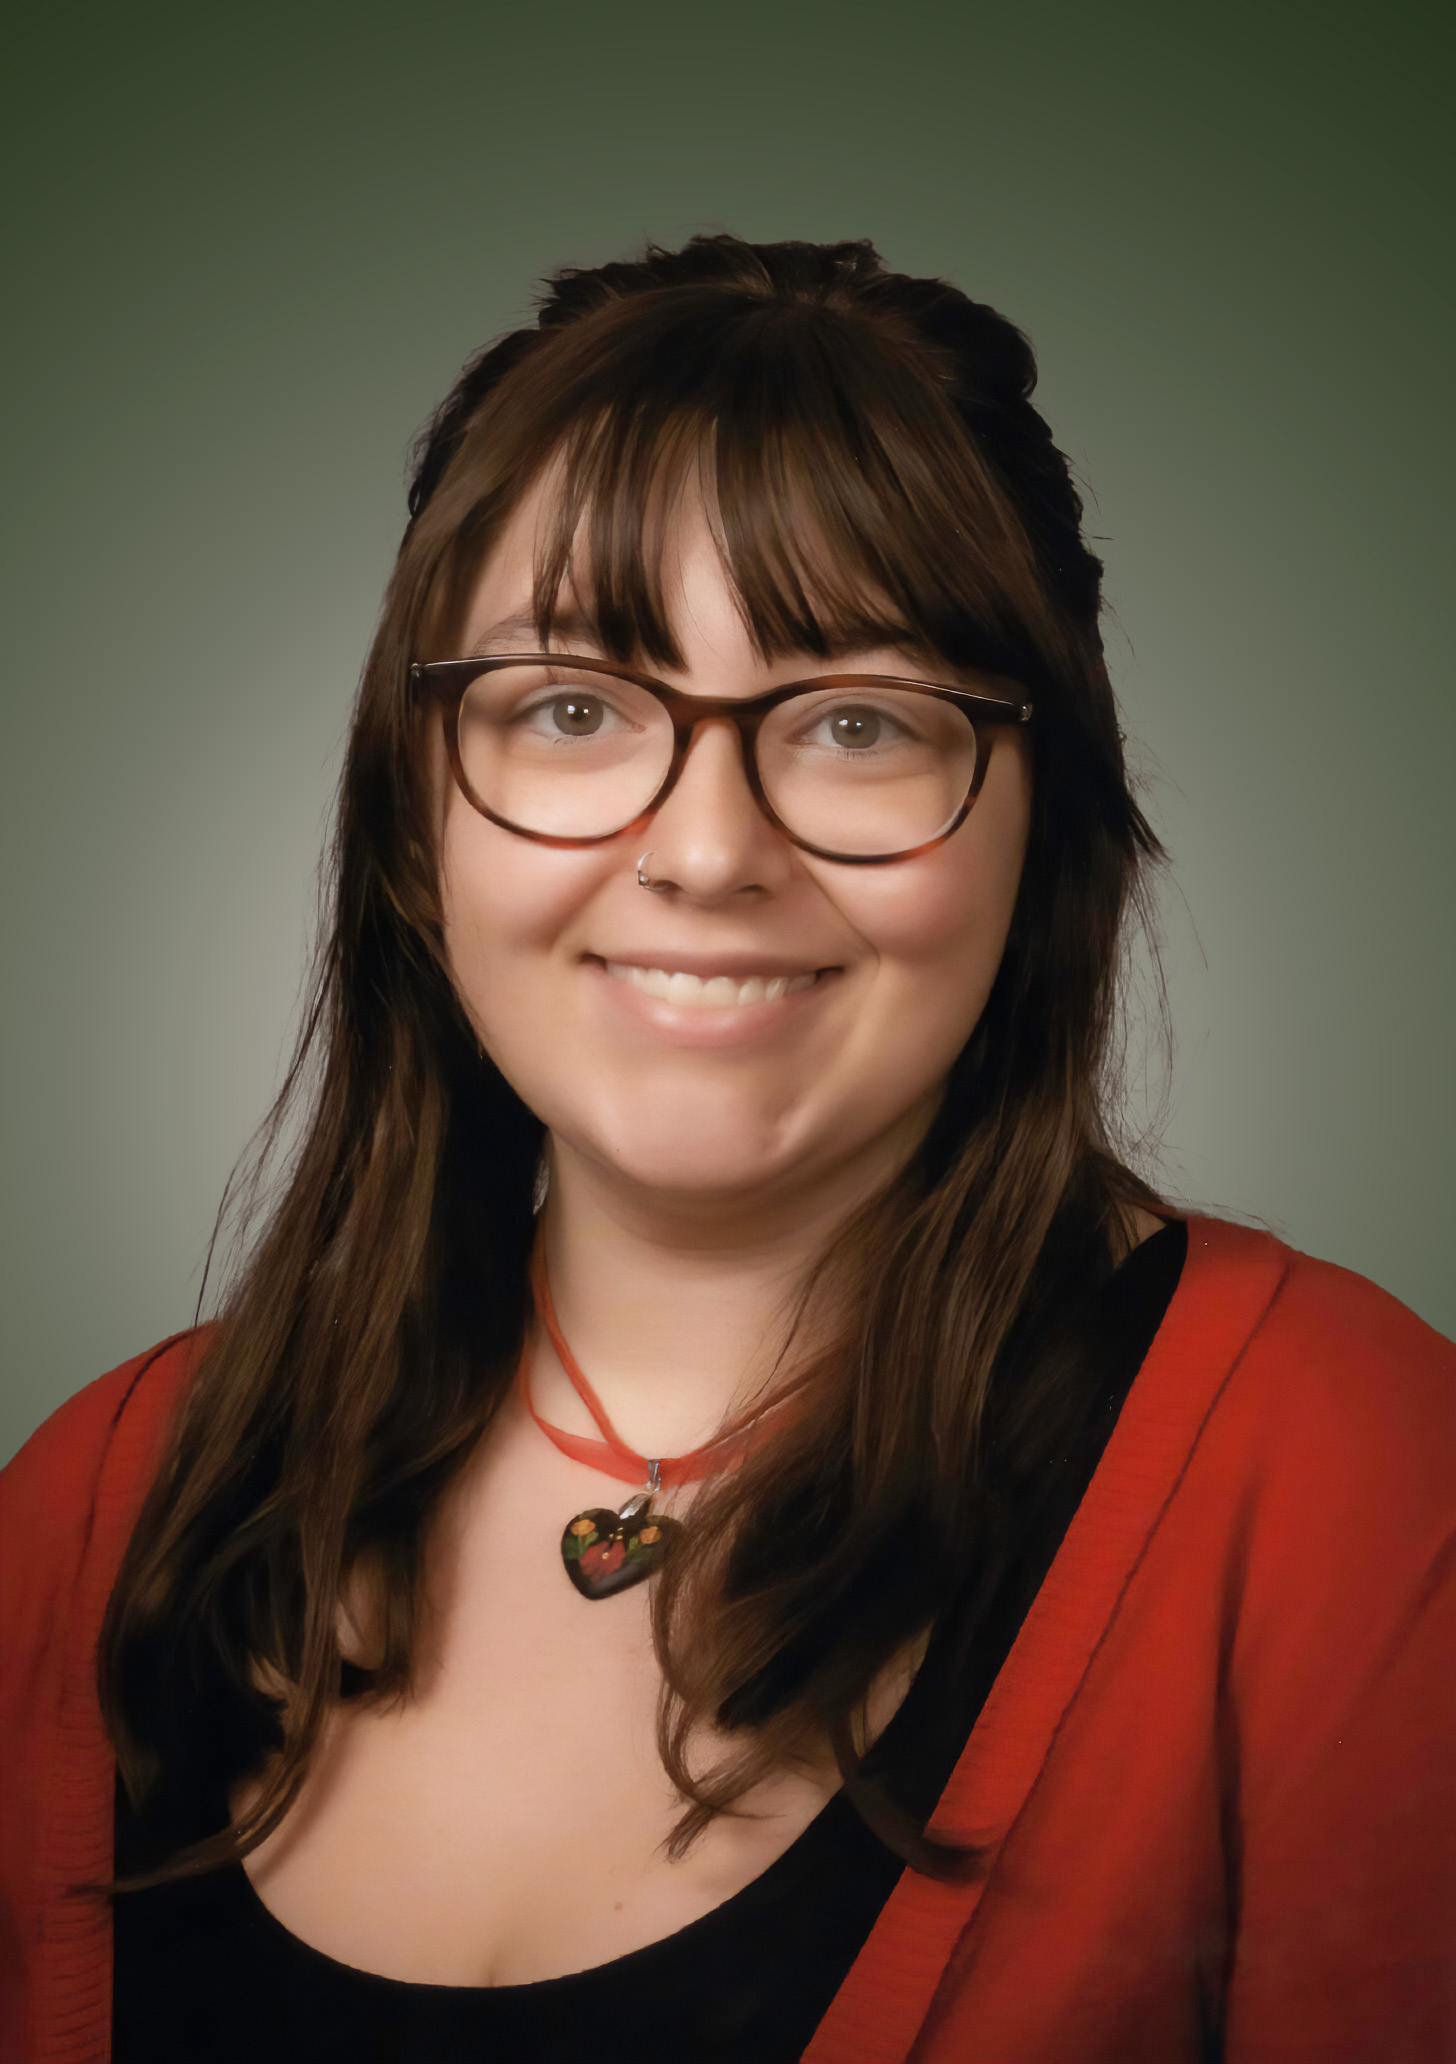 A color photo of ISABELLA SZABO smiling. She has brown hair with bangs, glasses, and a red cardigan.